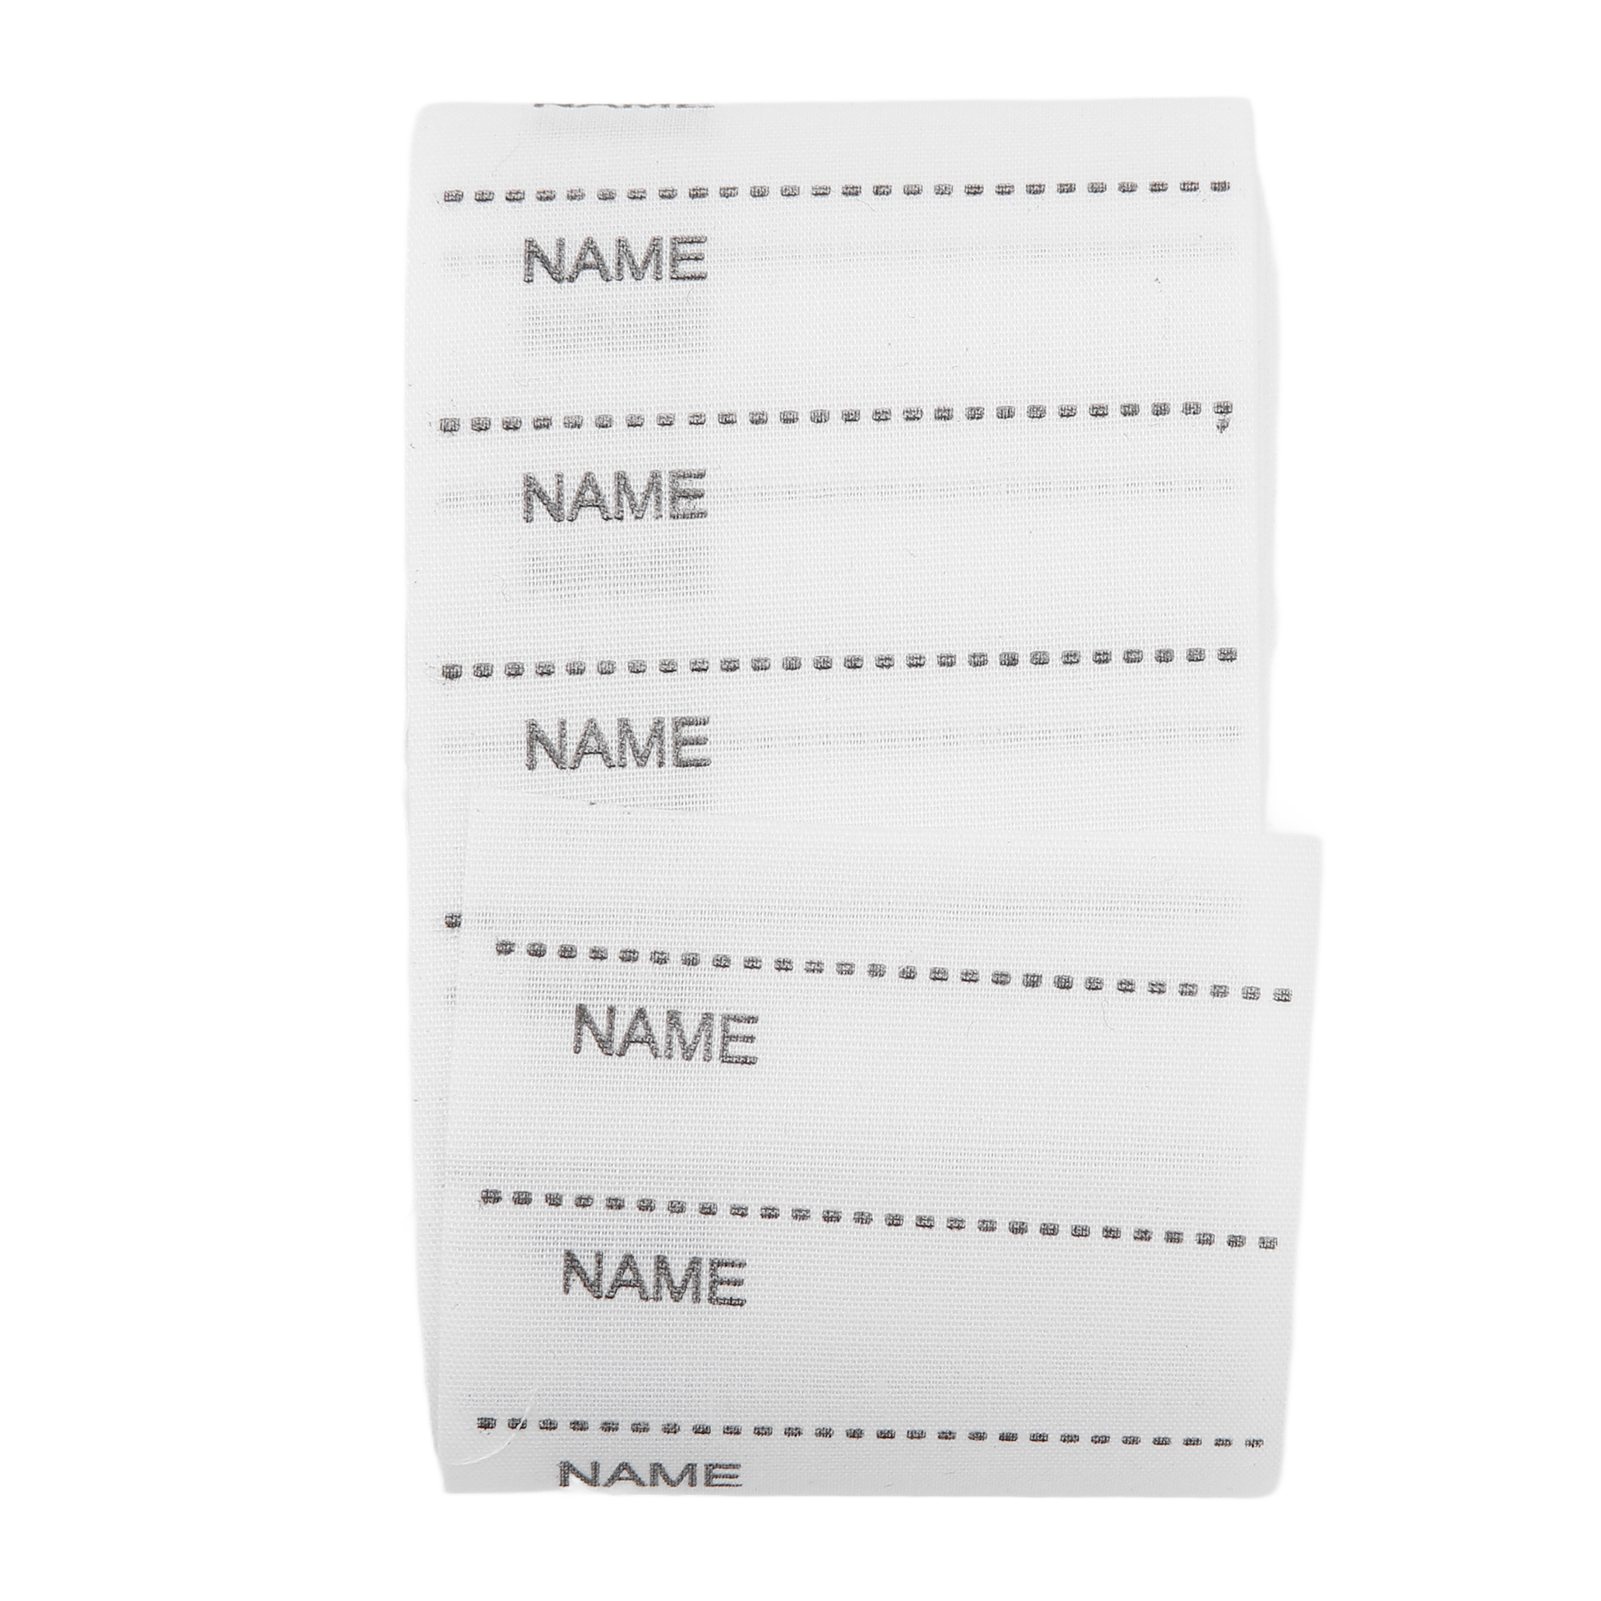 Octpeak Clothing Name Labels Tags,Writable Iron On Clothing Labels 5.5cm  Width Comfortable Fabrics Clothing Name Labels For School Uniforms Laundry  Room,Writable Iron On Clothing Labels 